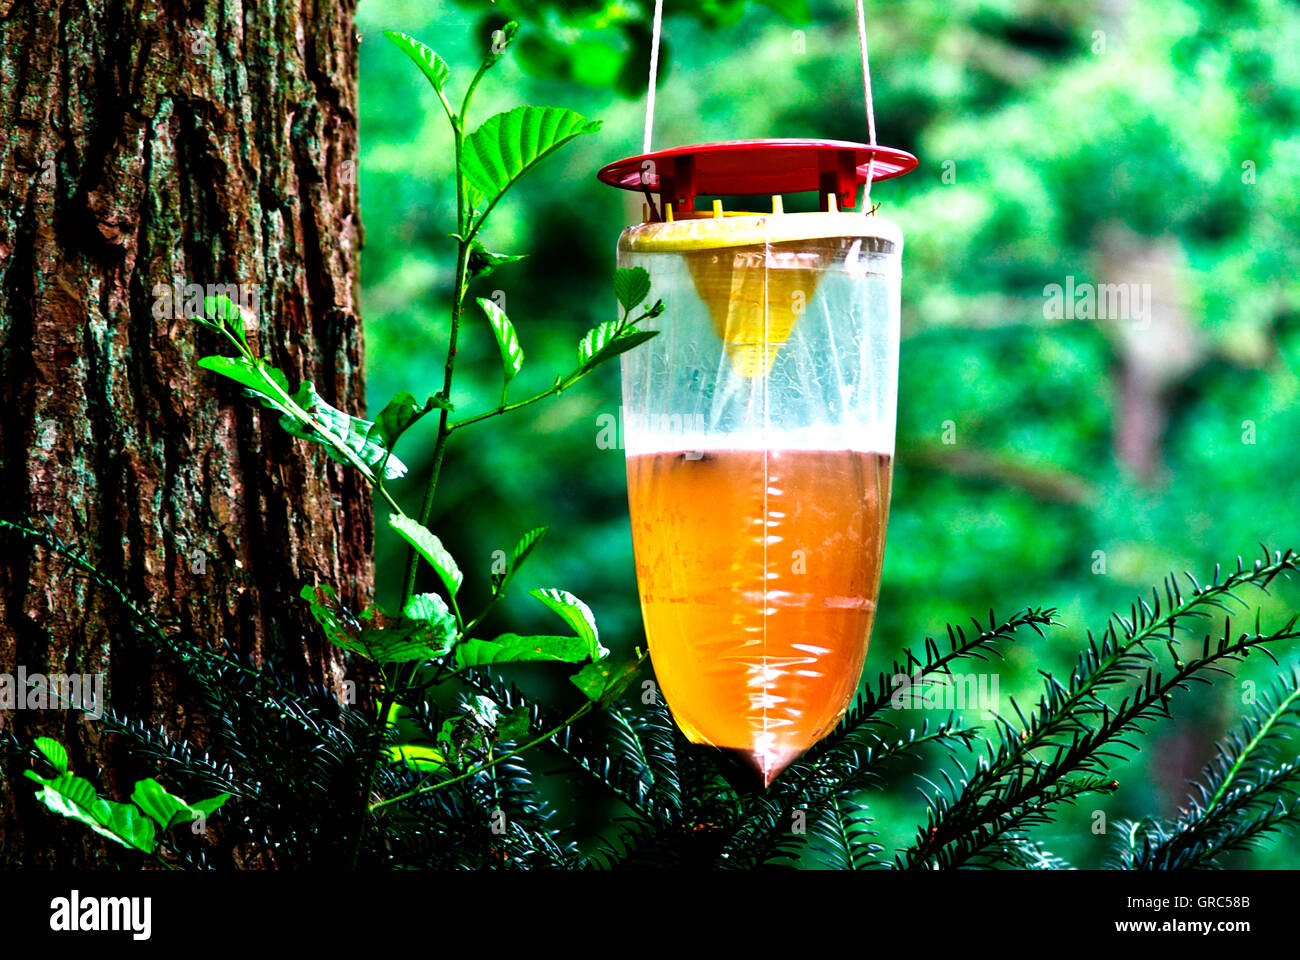 Insect trap - Stock Image - E776/0120 - Science Photo Library